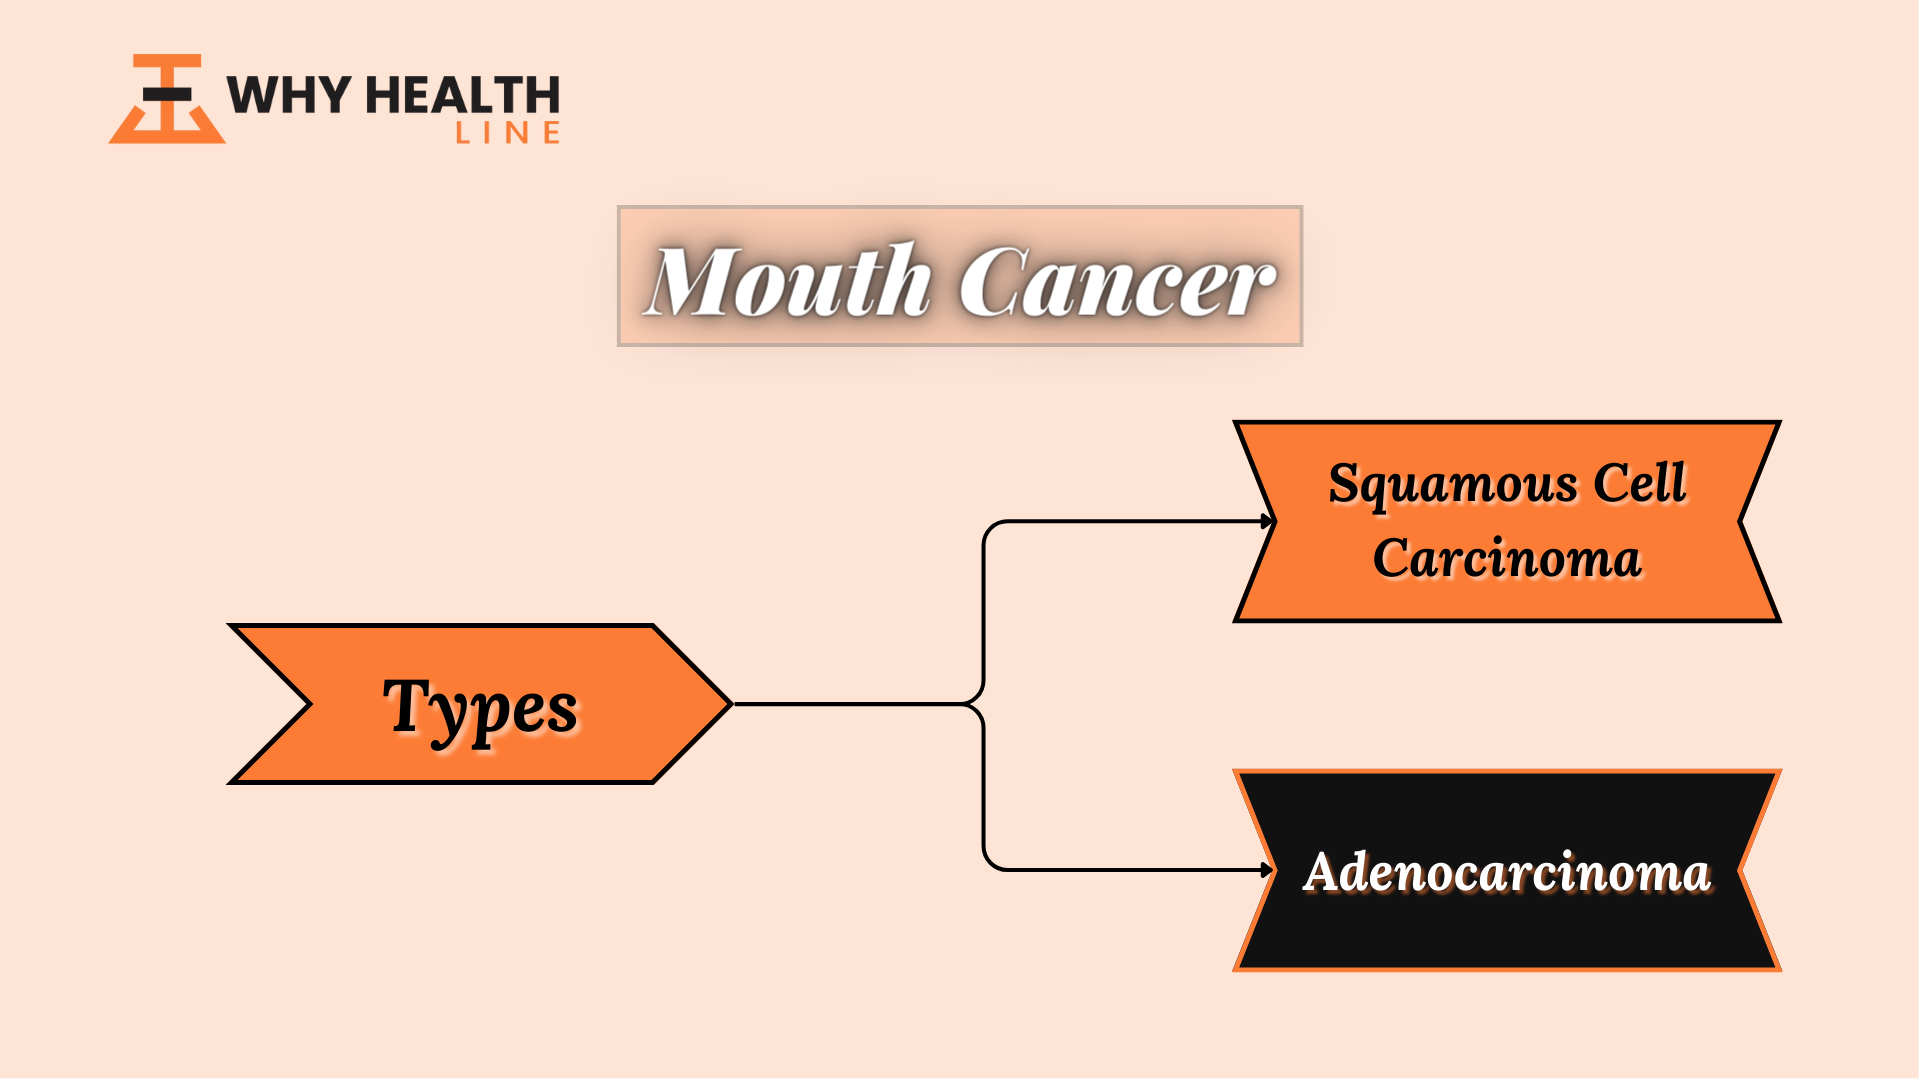 Types of Mouth Cancer